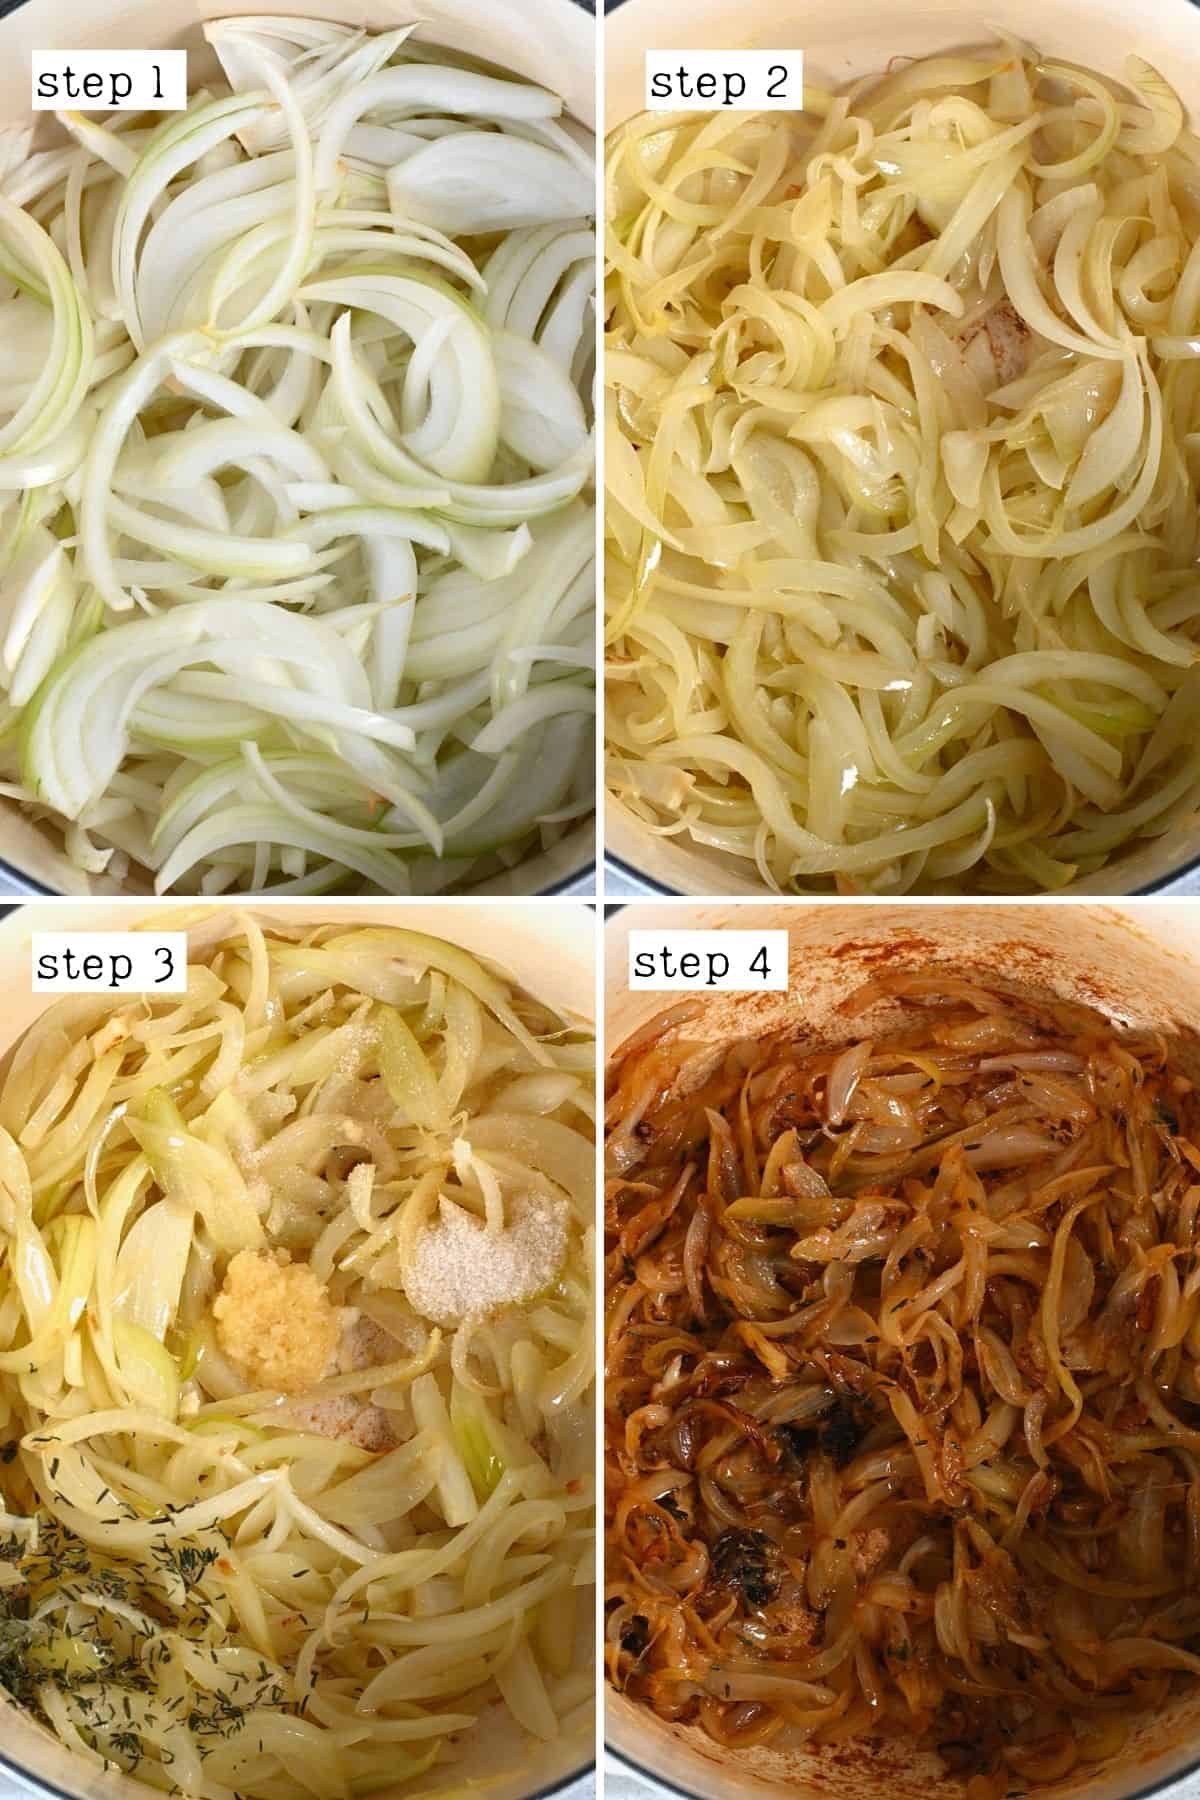 Steps for cooking onions